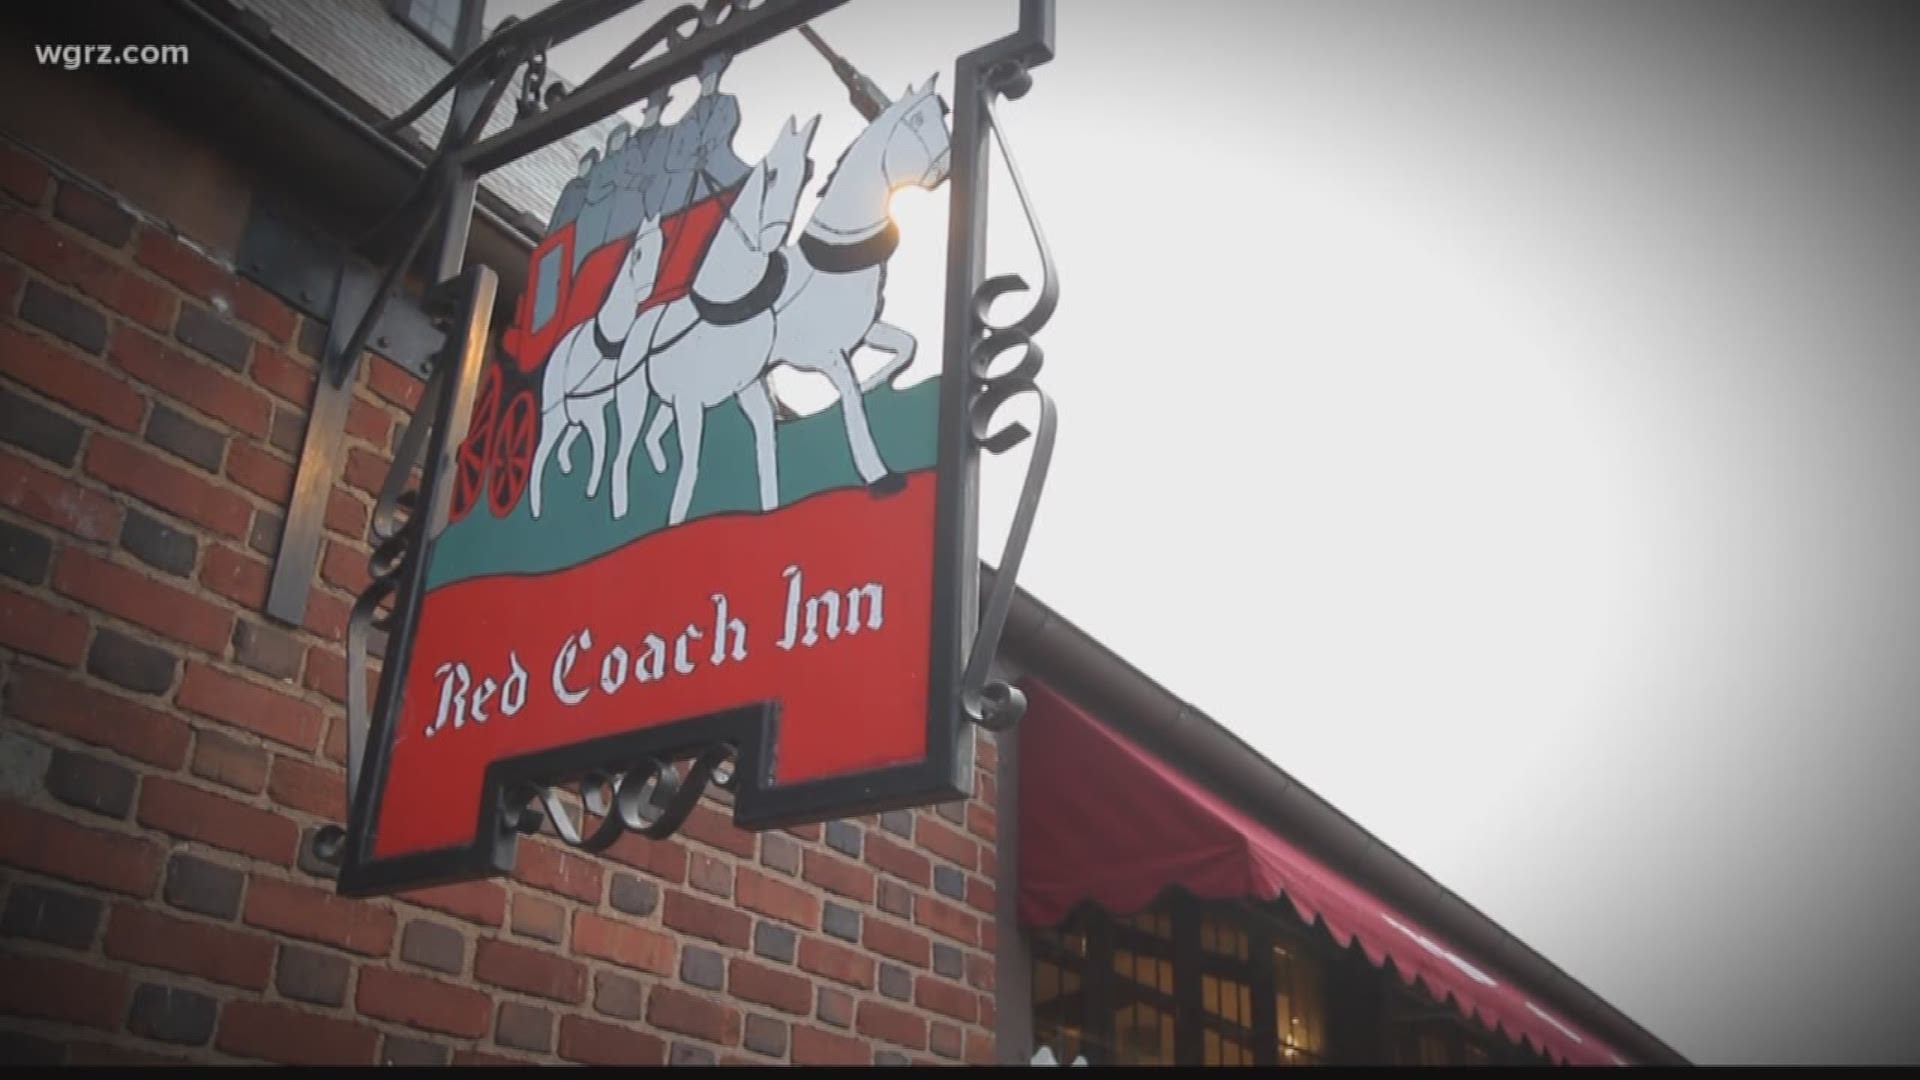 The Red Coach Inn is a spot where many believe, some of the guests are permanent.